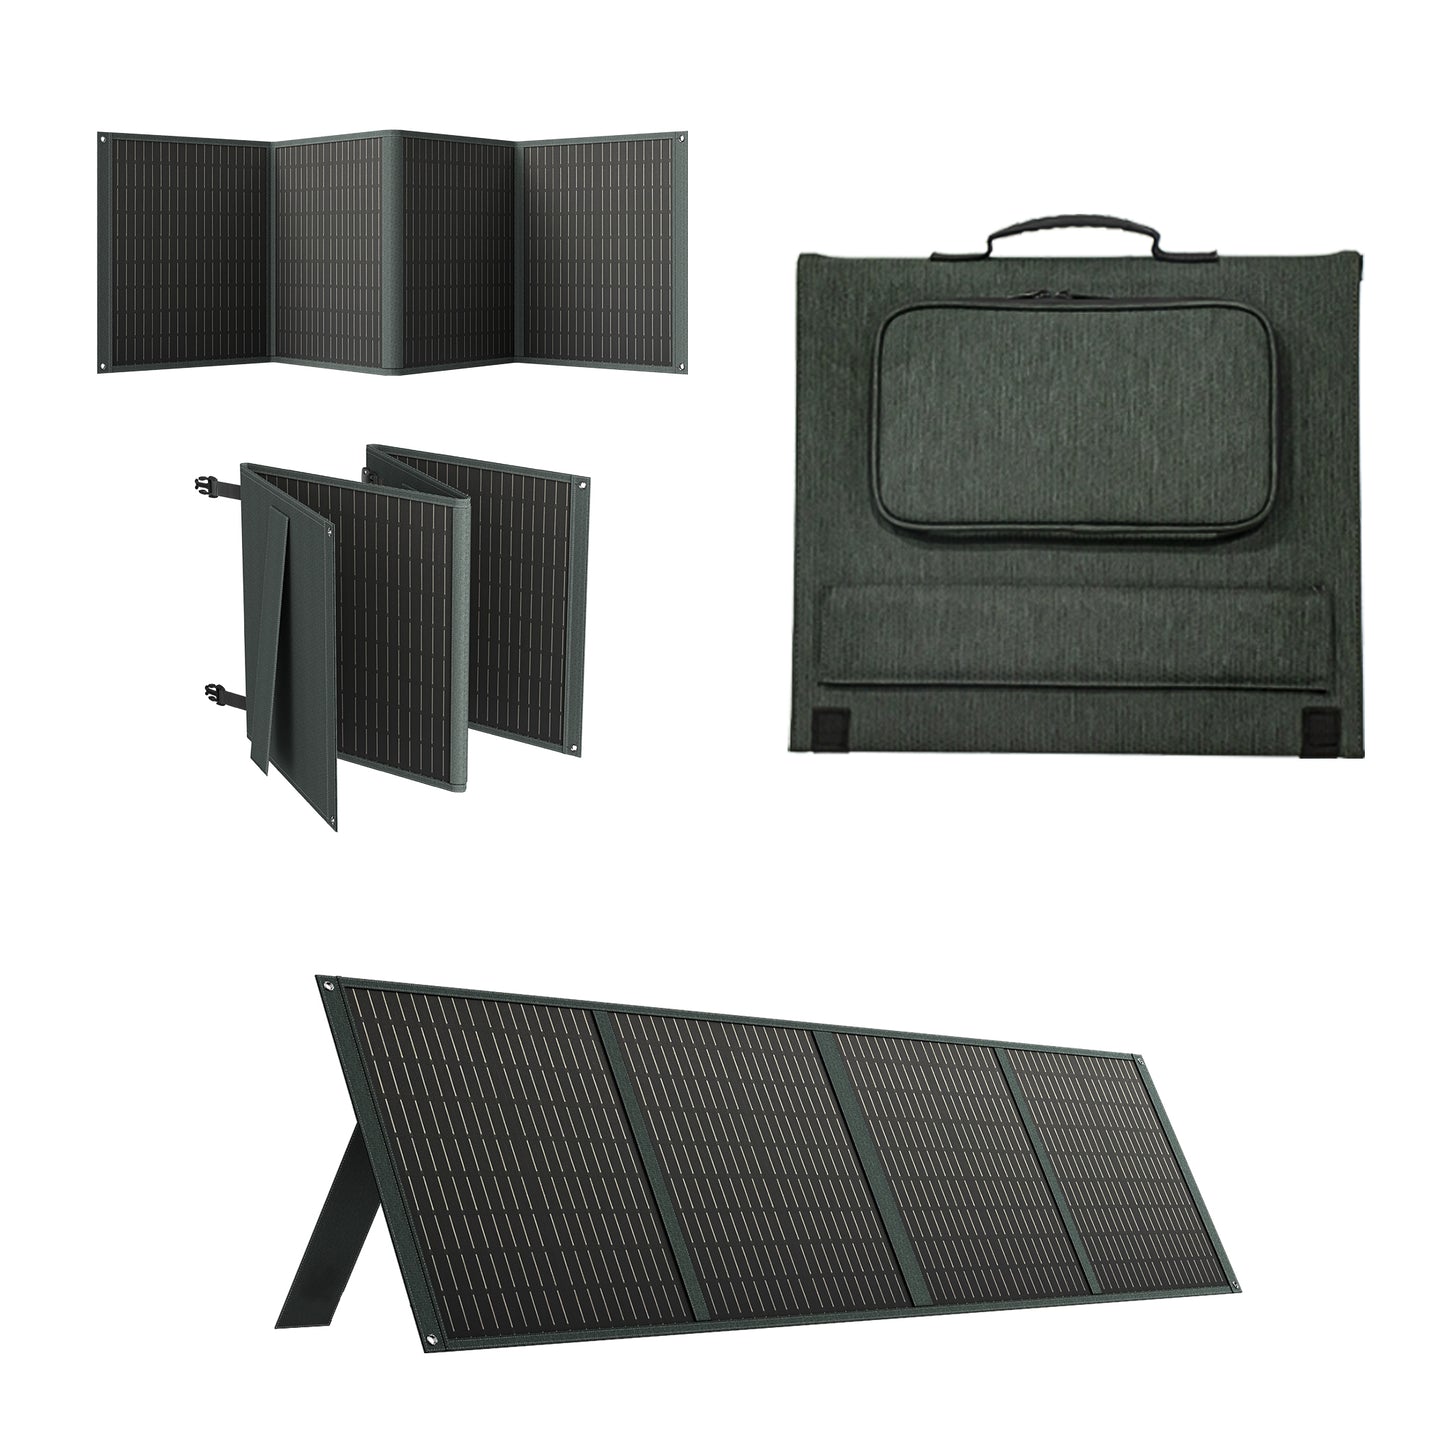 110W Foldable Solar Panel for Power Station USB+PD Mobile Devices Serial & Parallel MC4 Portable Solar Panel with Adjustable Kickstand for Rooftop Off-Grid